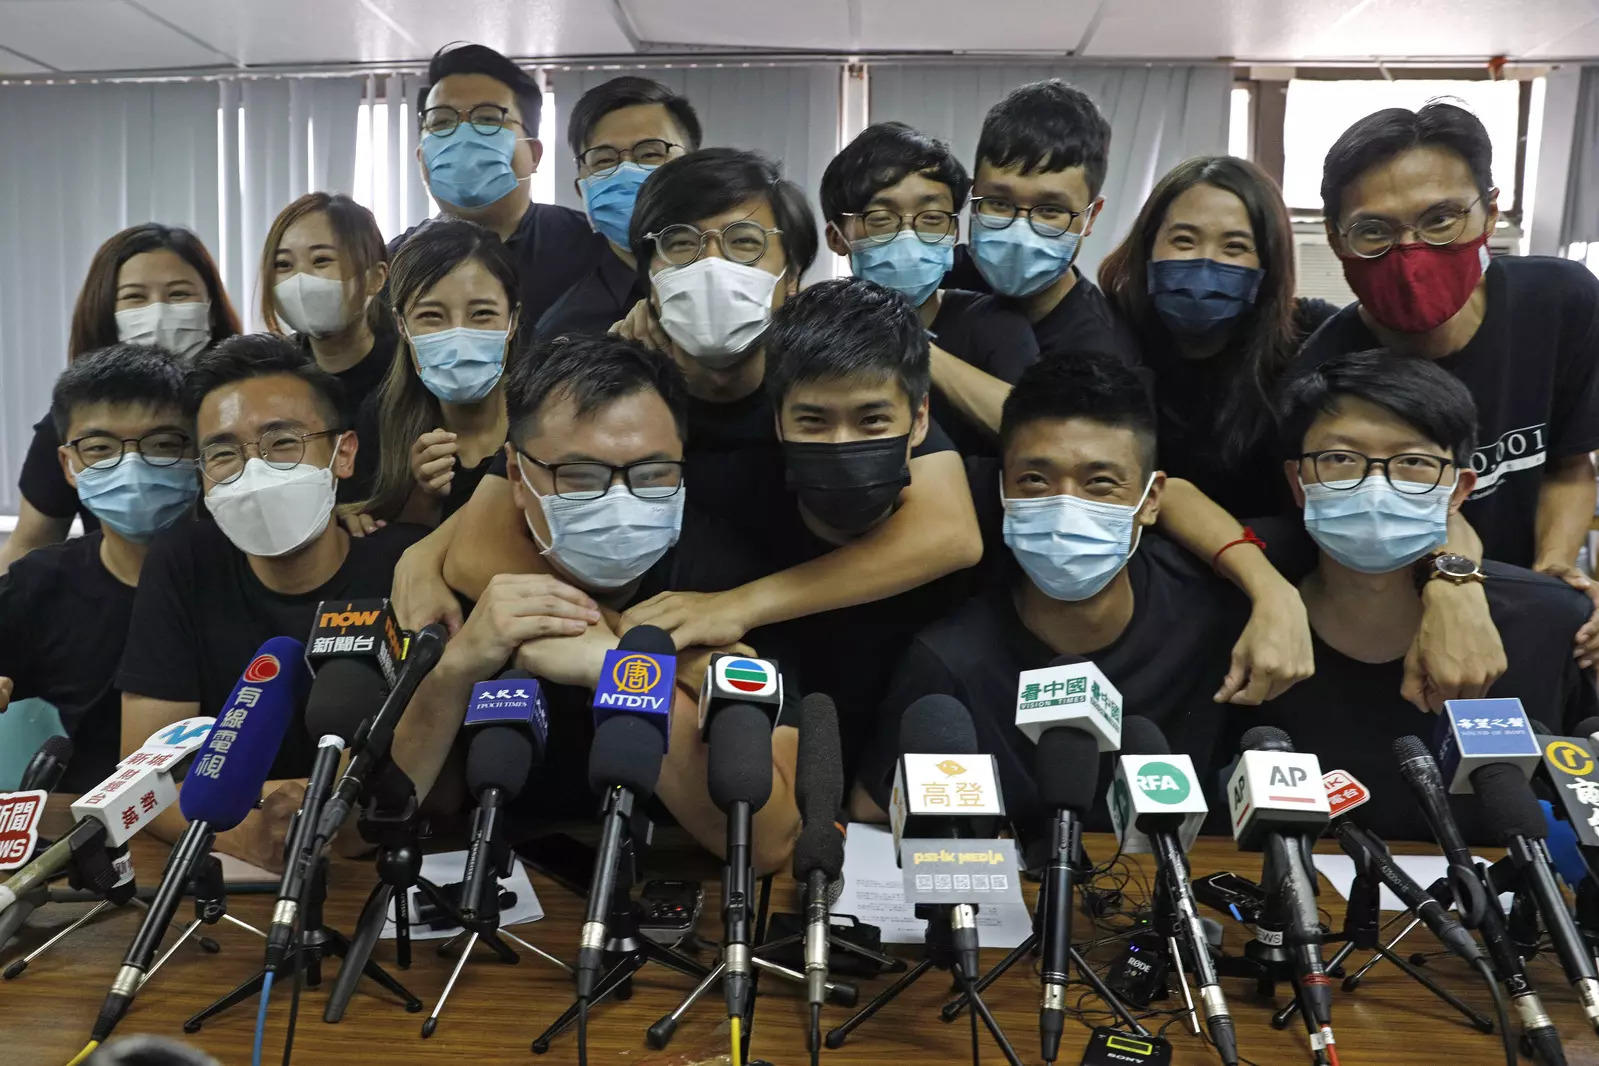 Pro-democracy activists who were elected from unofficial primaries, including Joshua Wong, attend a press conference in Hong Kong on July 15, 2020. (File photo: AP)